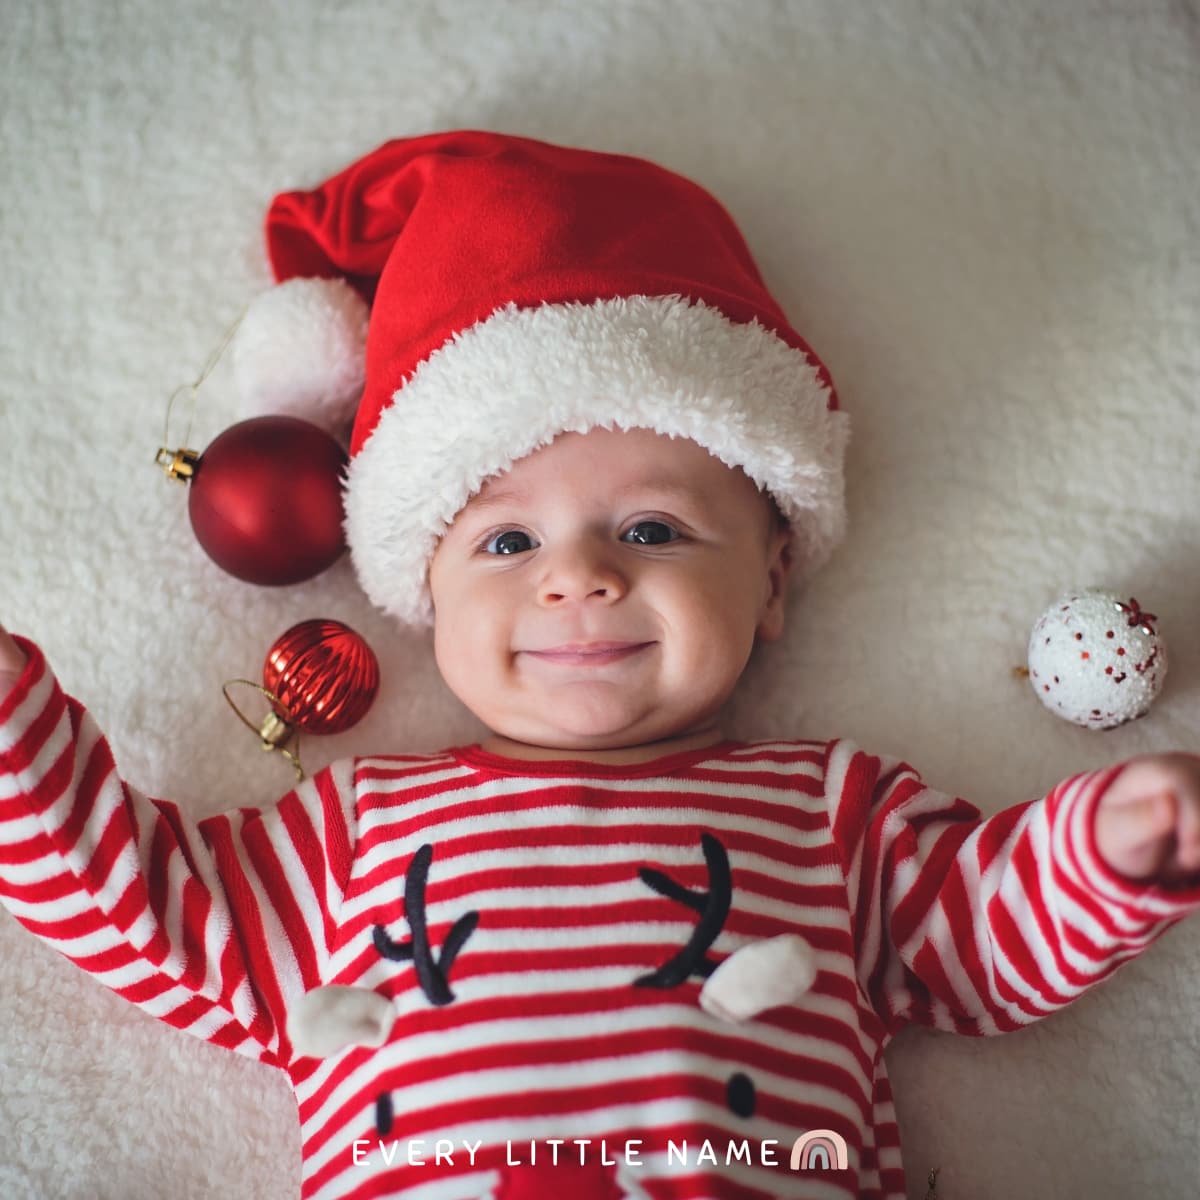 Smiling baby wearing Christmas outfit.